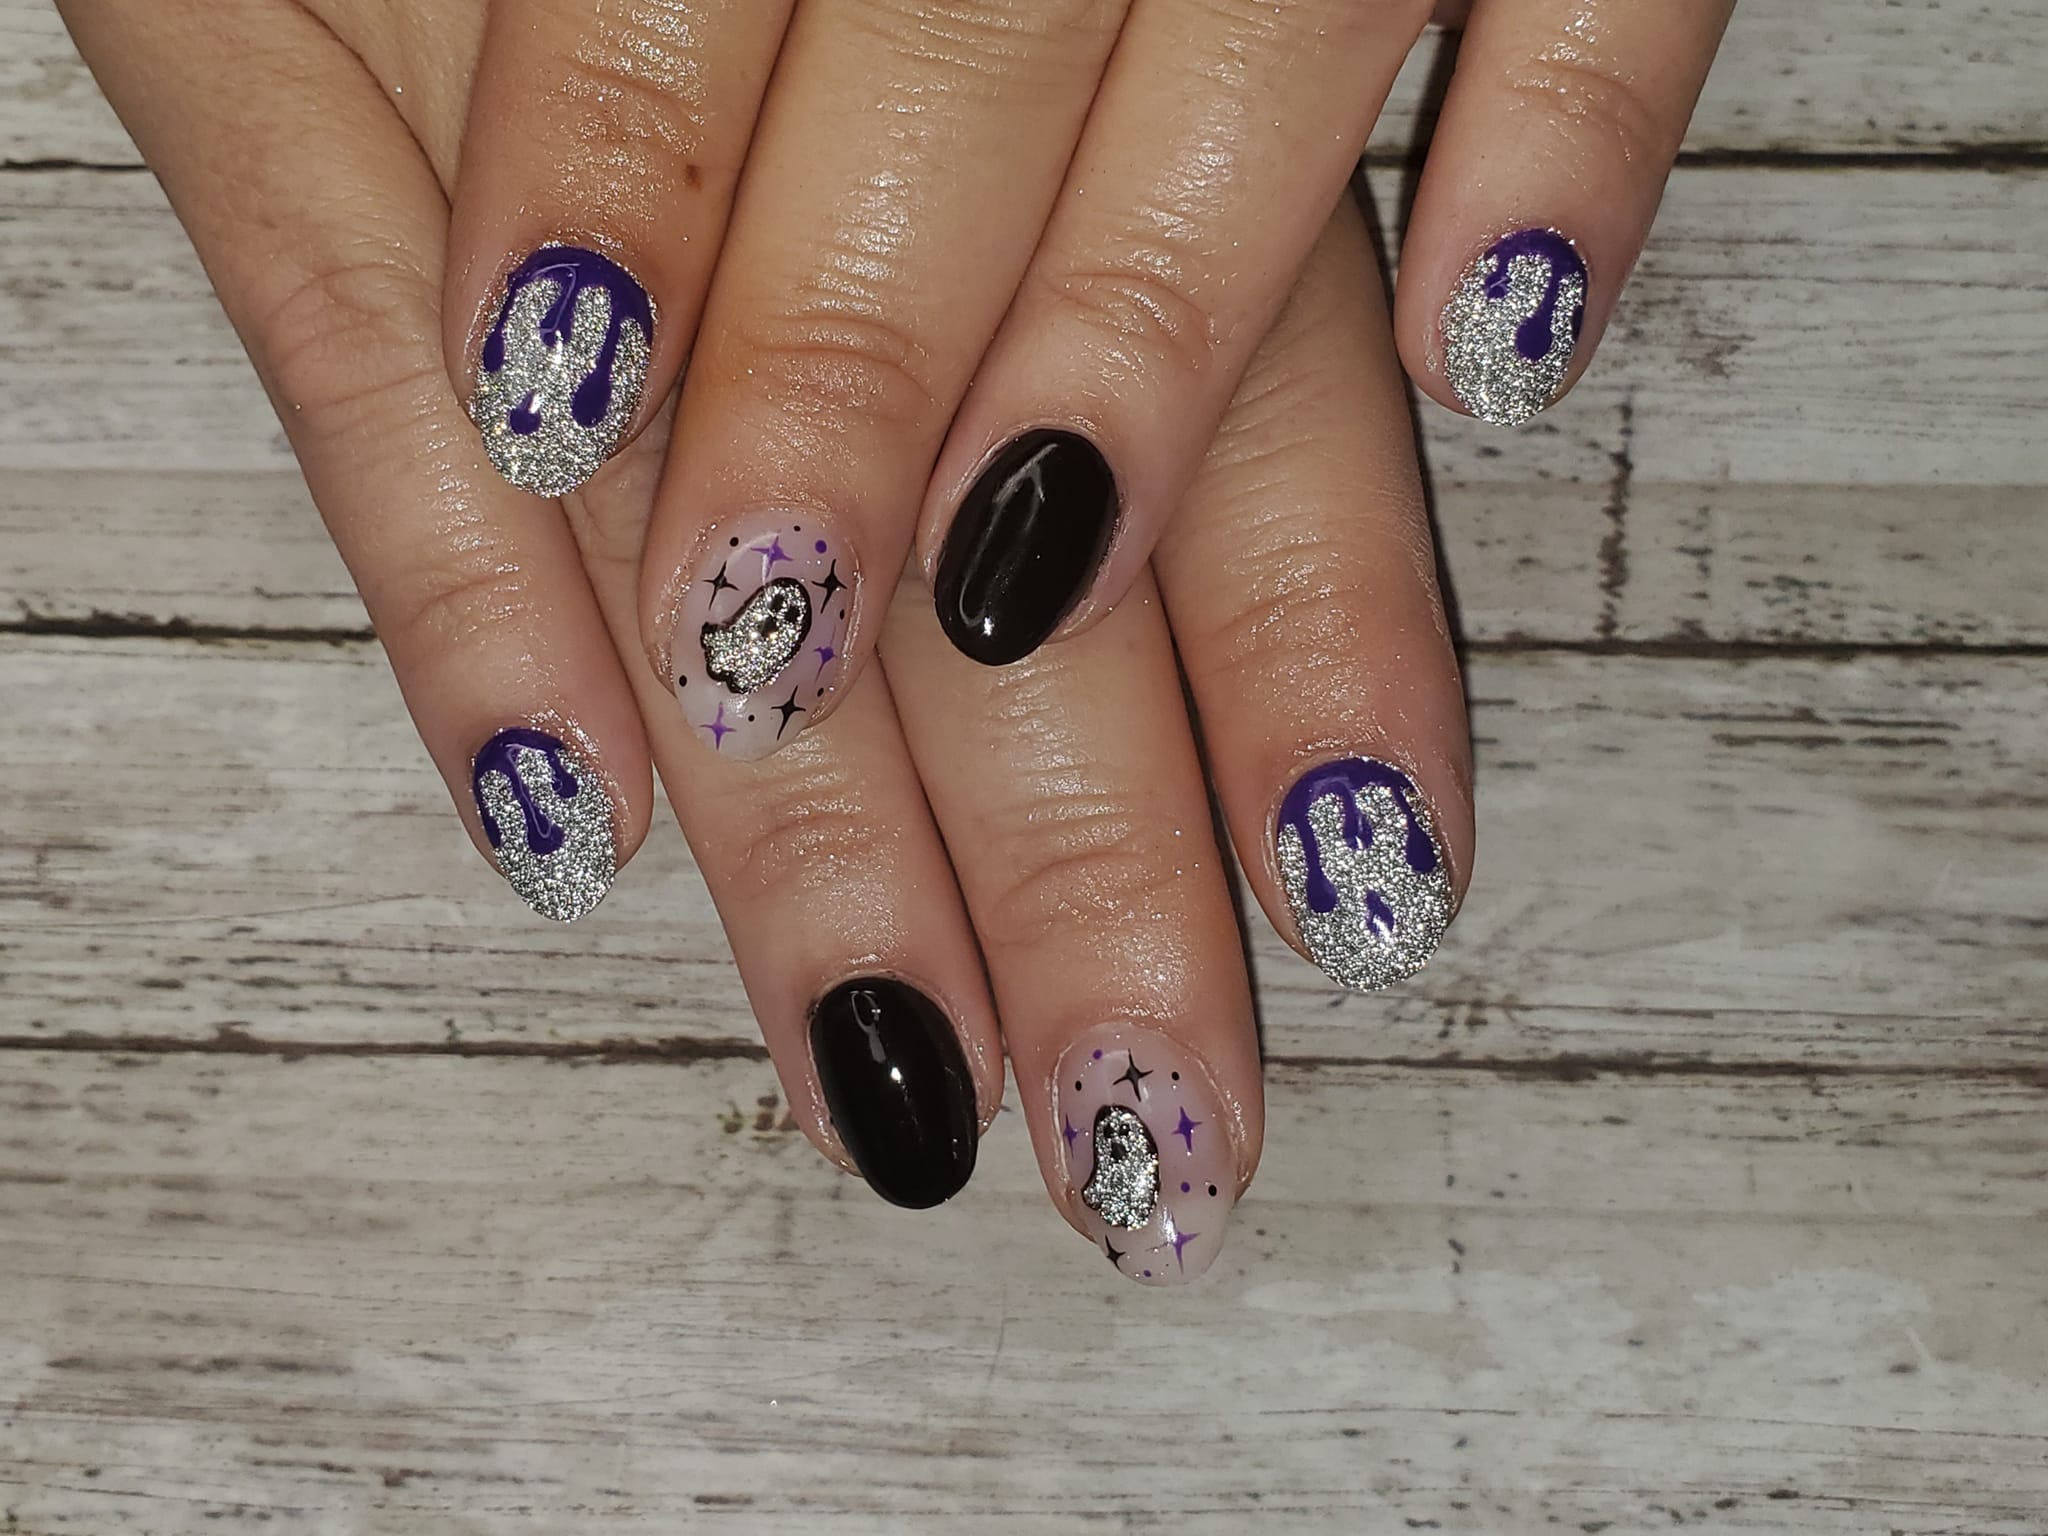 Spooky Halloween Nails With Ghost And Drip Silver Reflective Glitter, Black Polish, Purple Drip Ghost Nail Art Nails